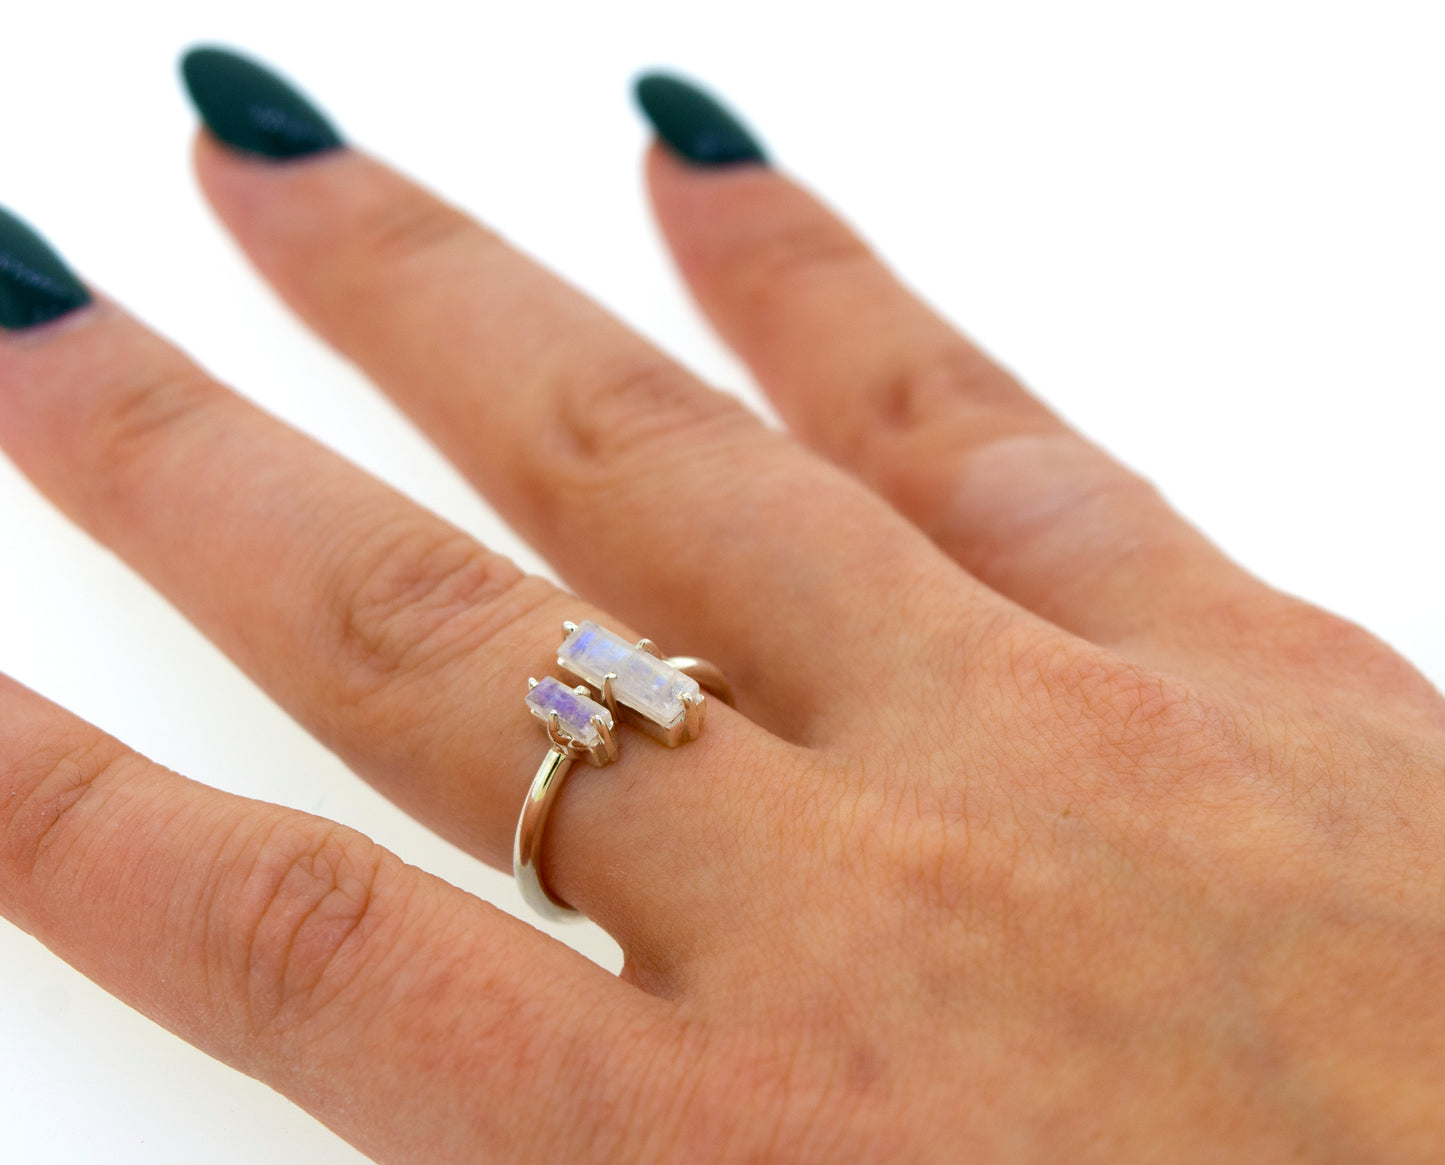 
                  
                    Close-up of a woman's hand displaying a Online Only Exclusive Adjustable Crystal Ring with a large, aurora crystal centerpiece on a simple band, against a white background.
                  
                